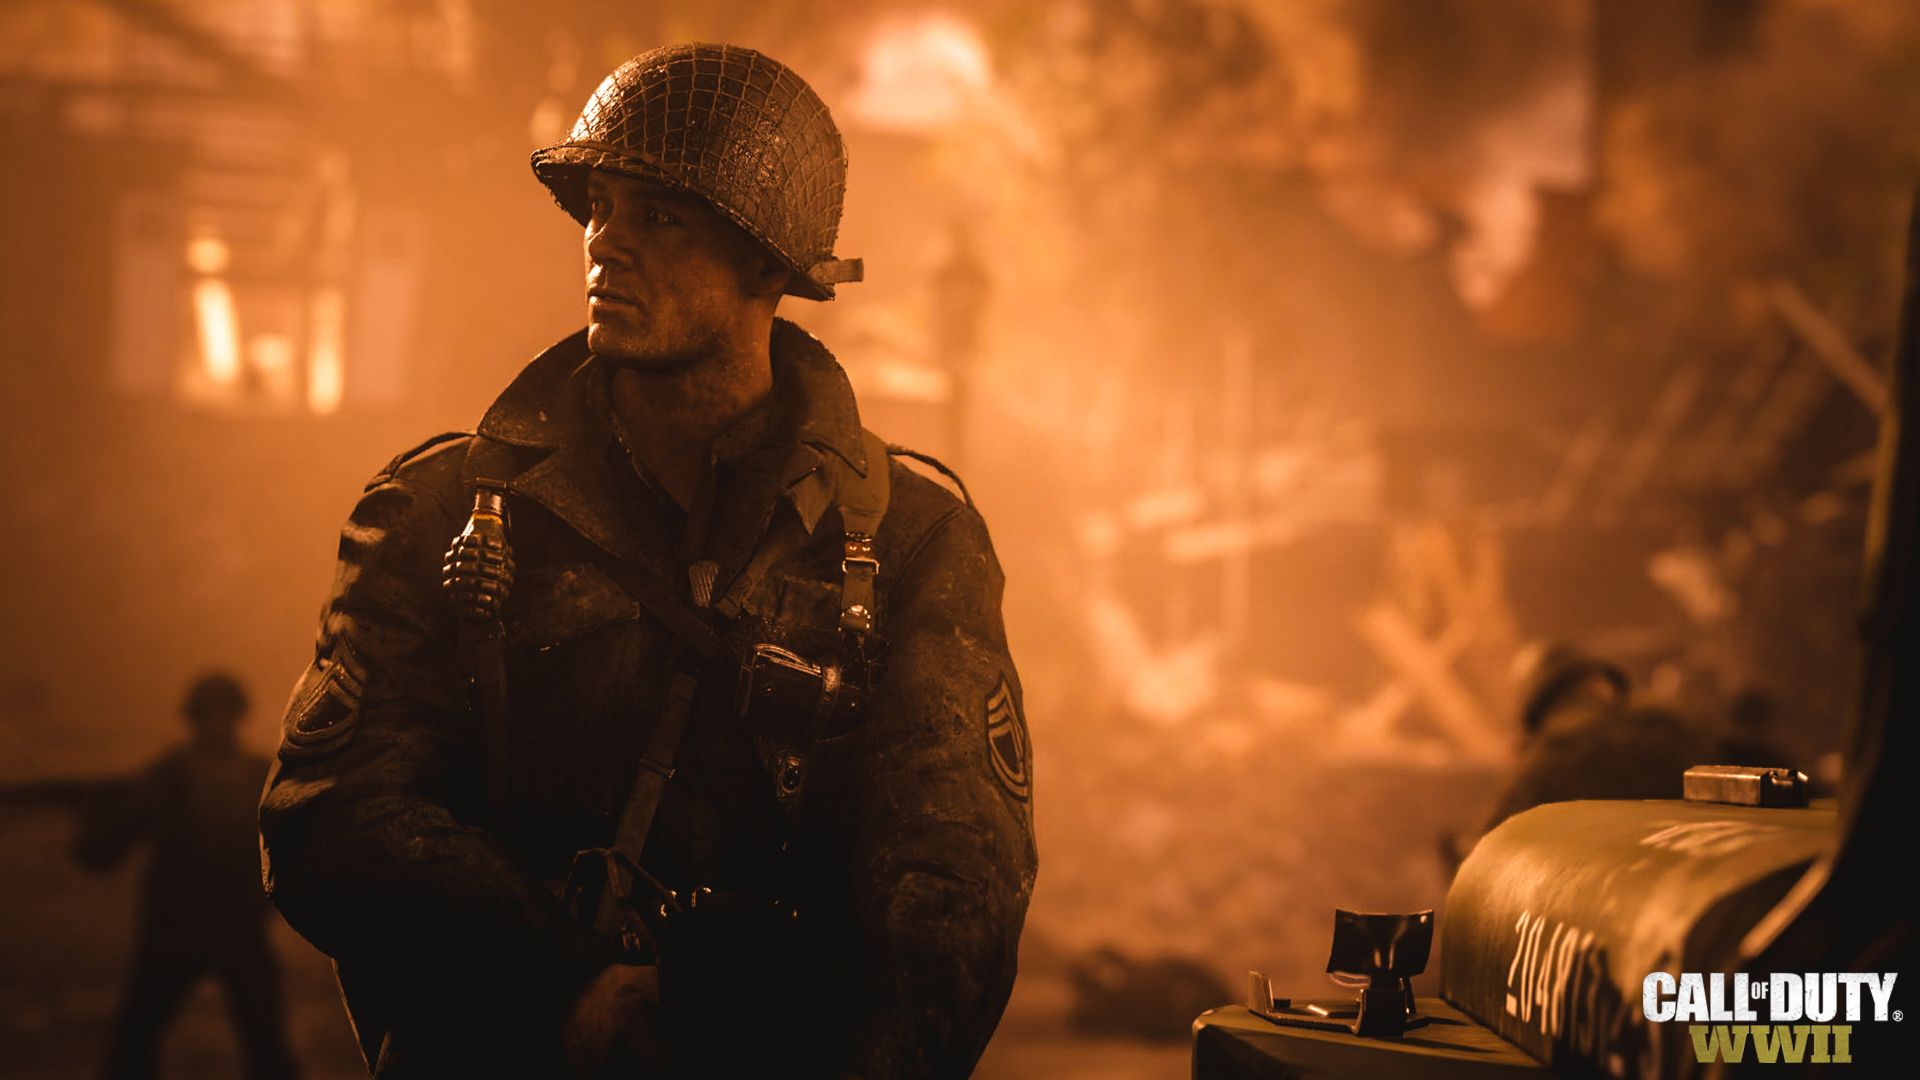 Call of Duty: WWII' gets better by returning to roots